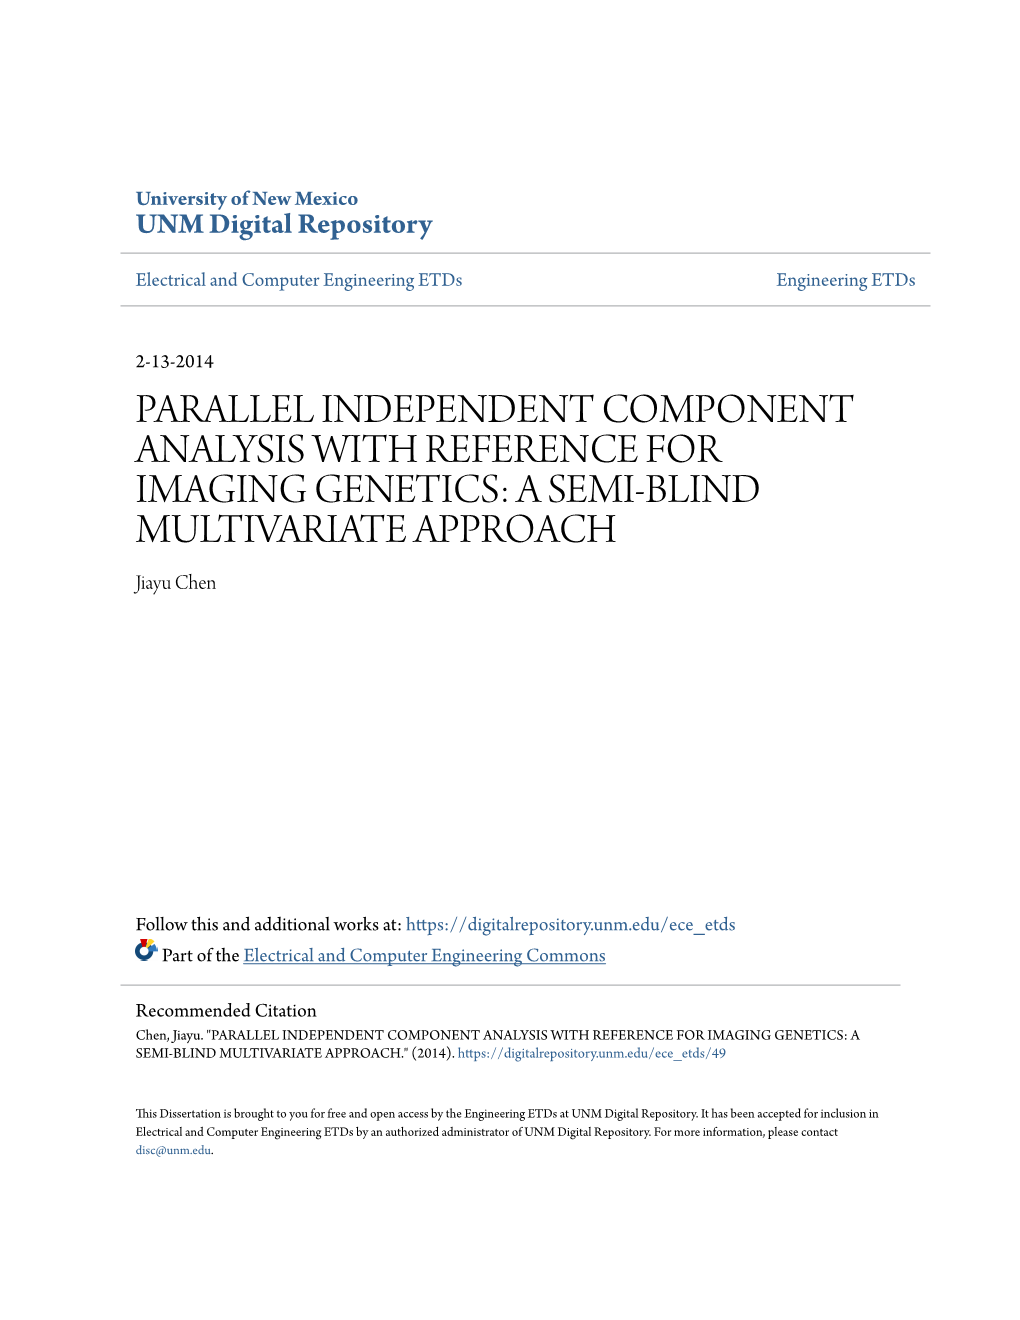 PARALLEL INDEPENDENT COMPONENT ANALYSIS with REFERENCE for IMAGING GENETICS: a SEMI-BLIND MULTIVARIATE APPROACH Jiayu Chen